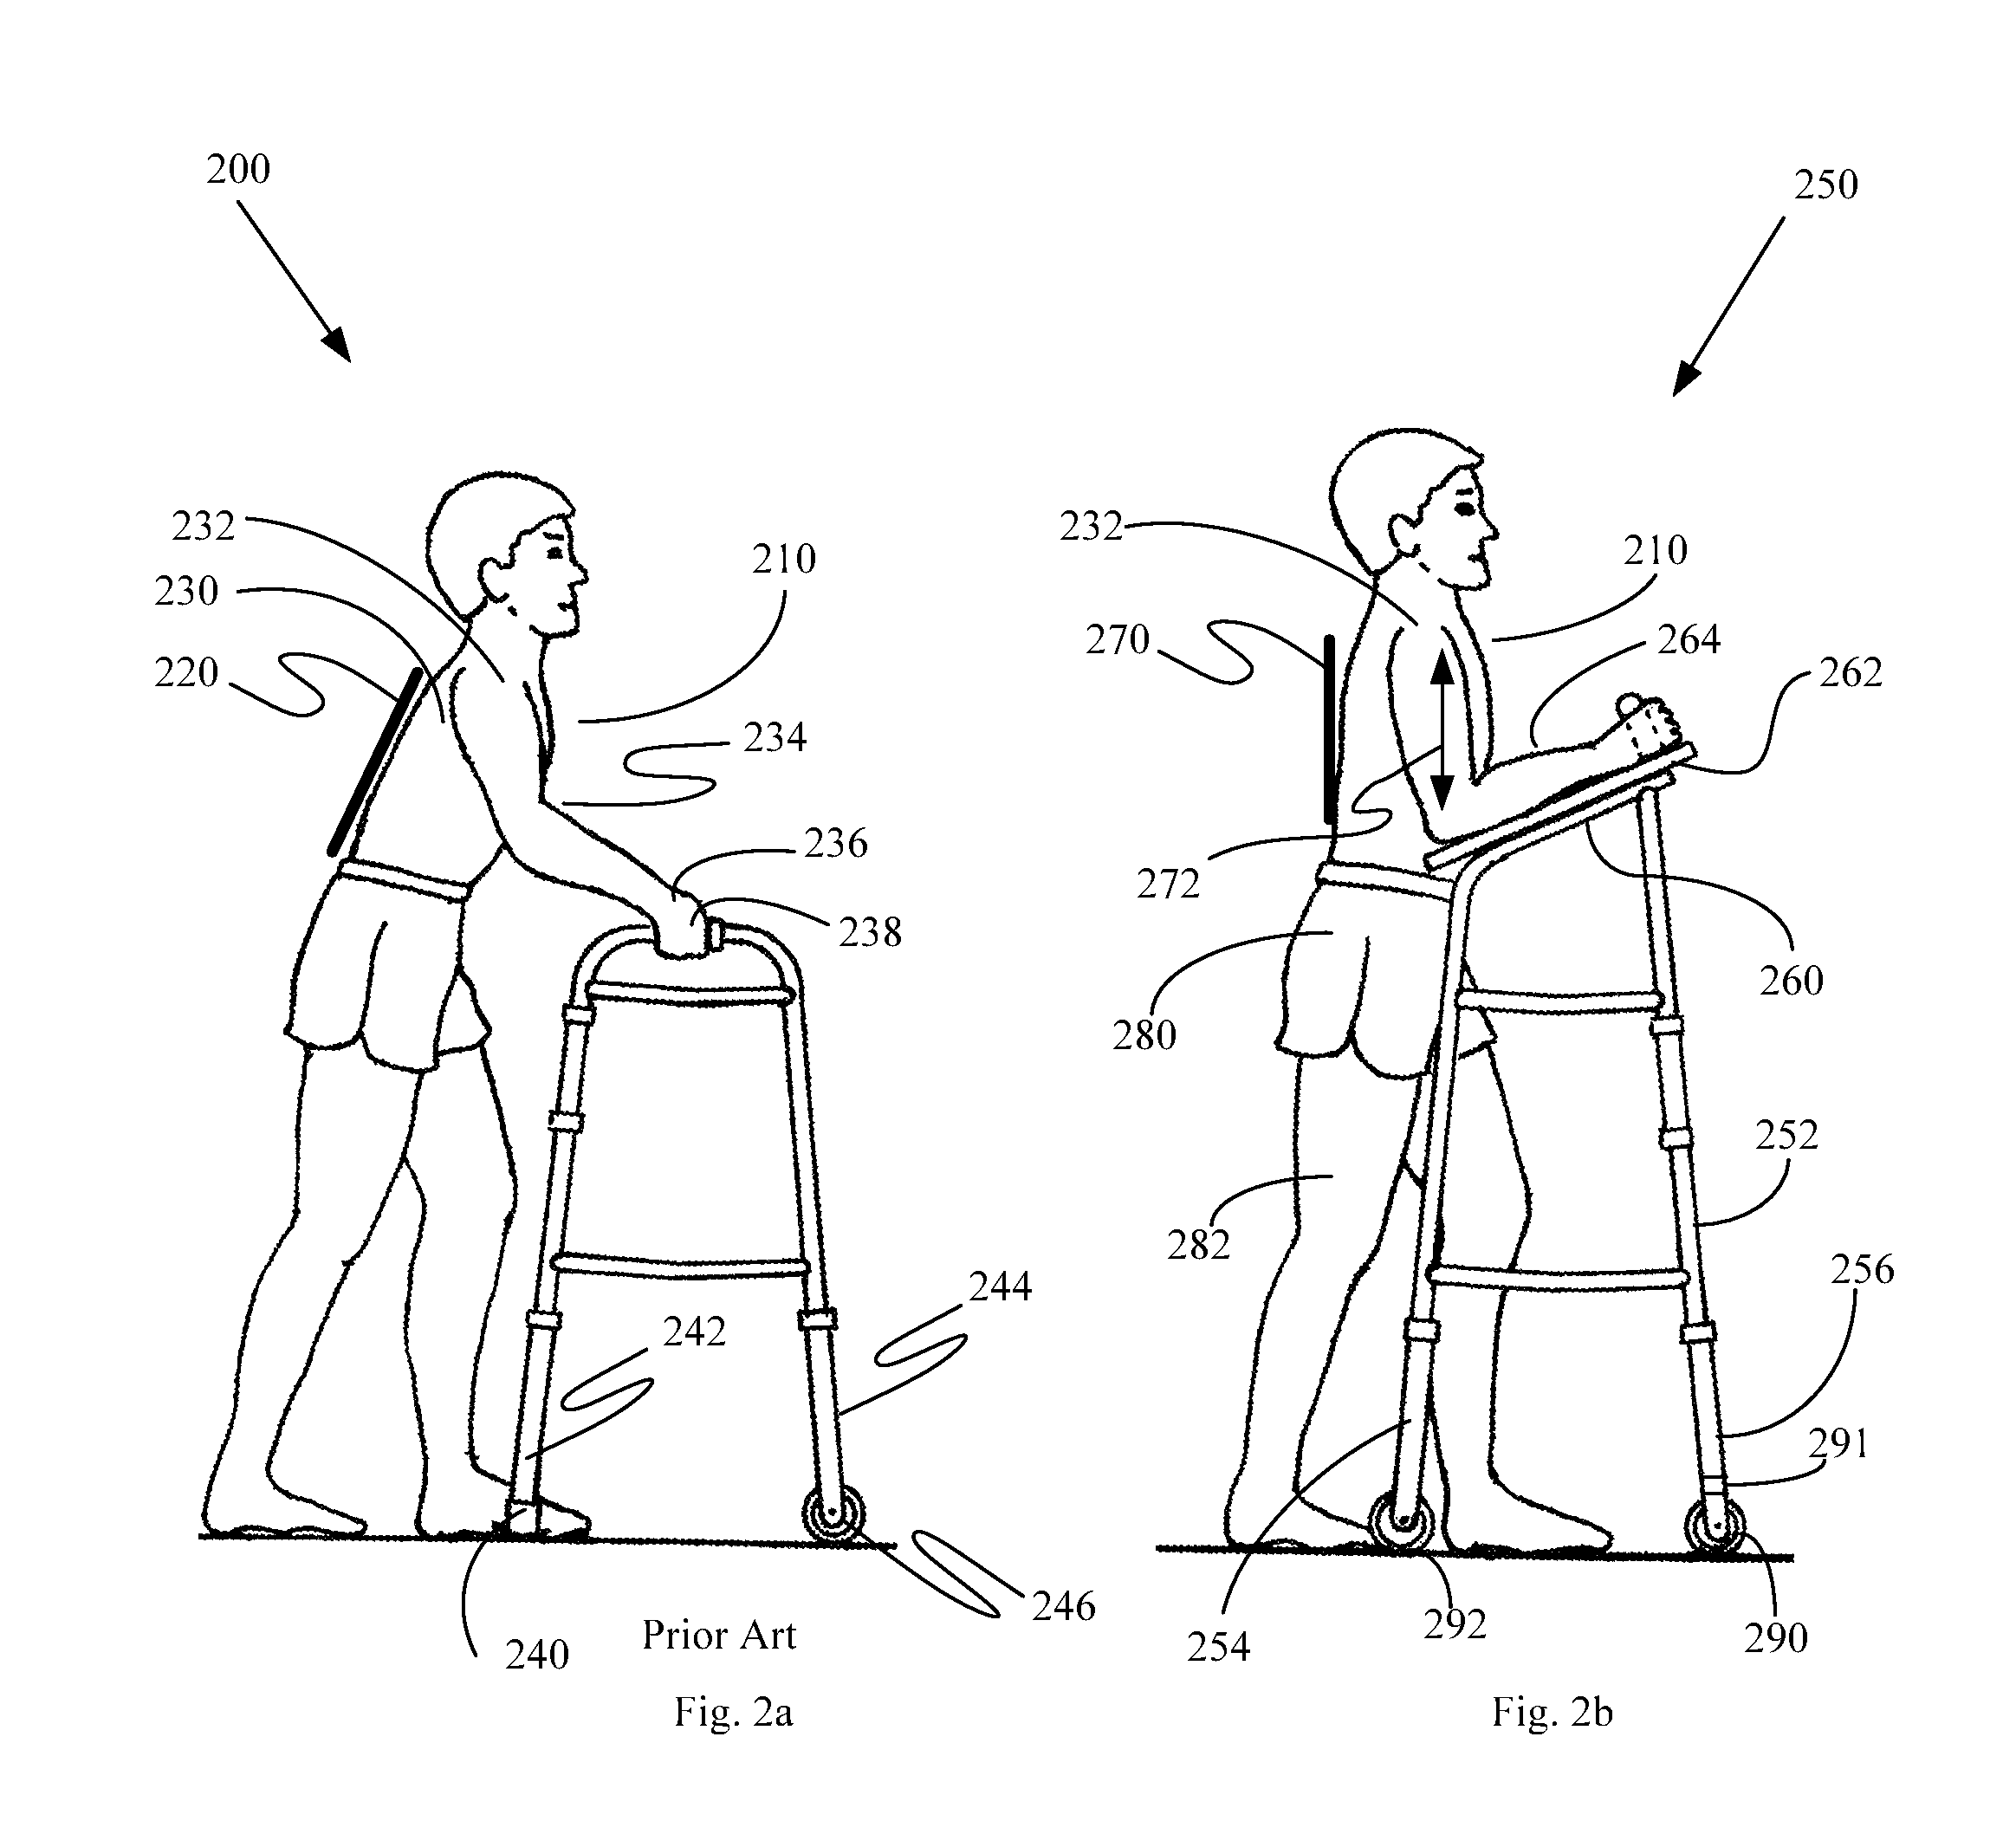 Up-right walker for supporting a patient with up-right posture